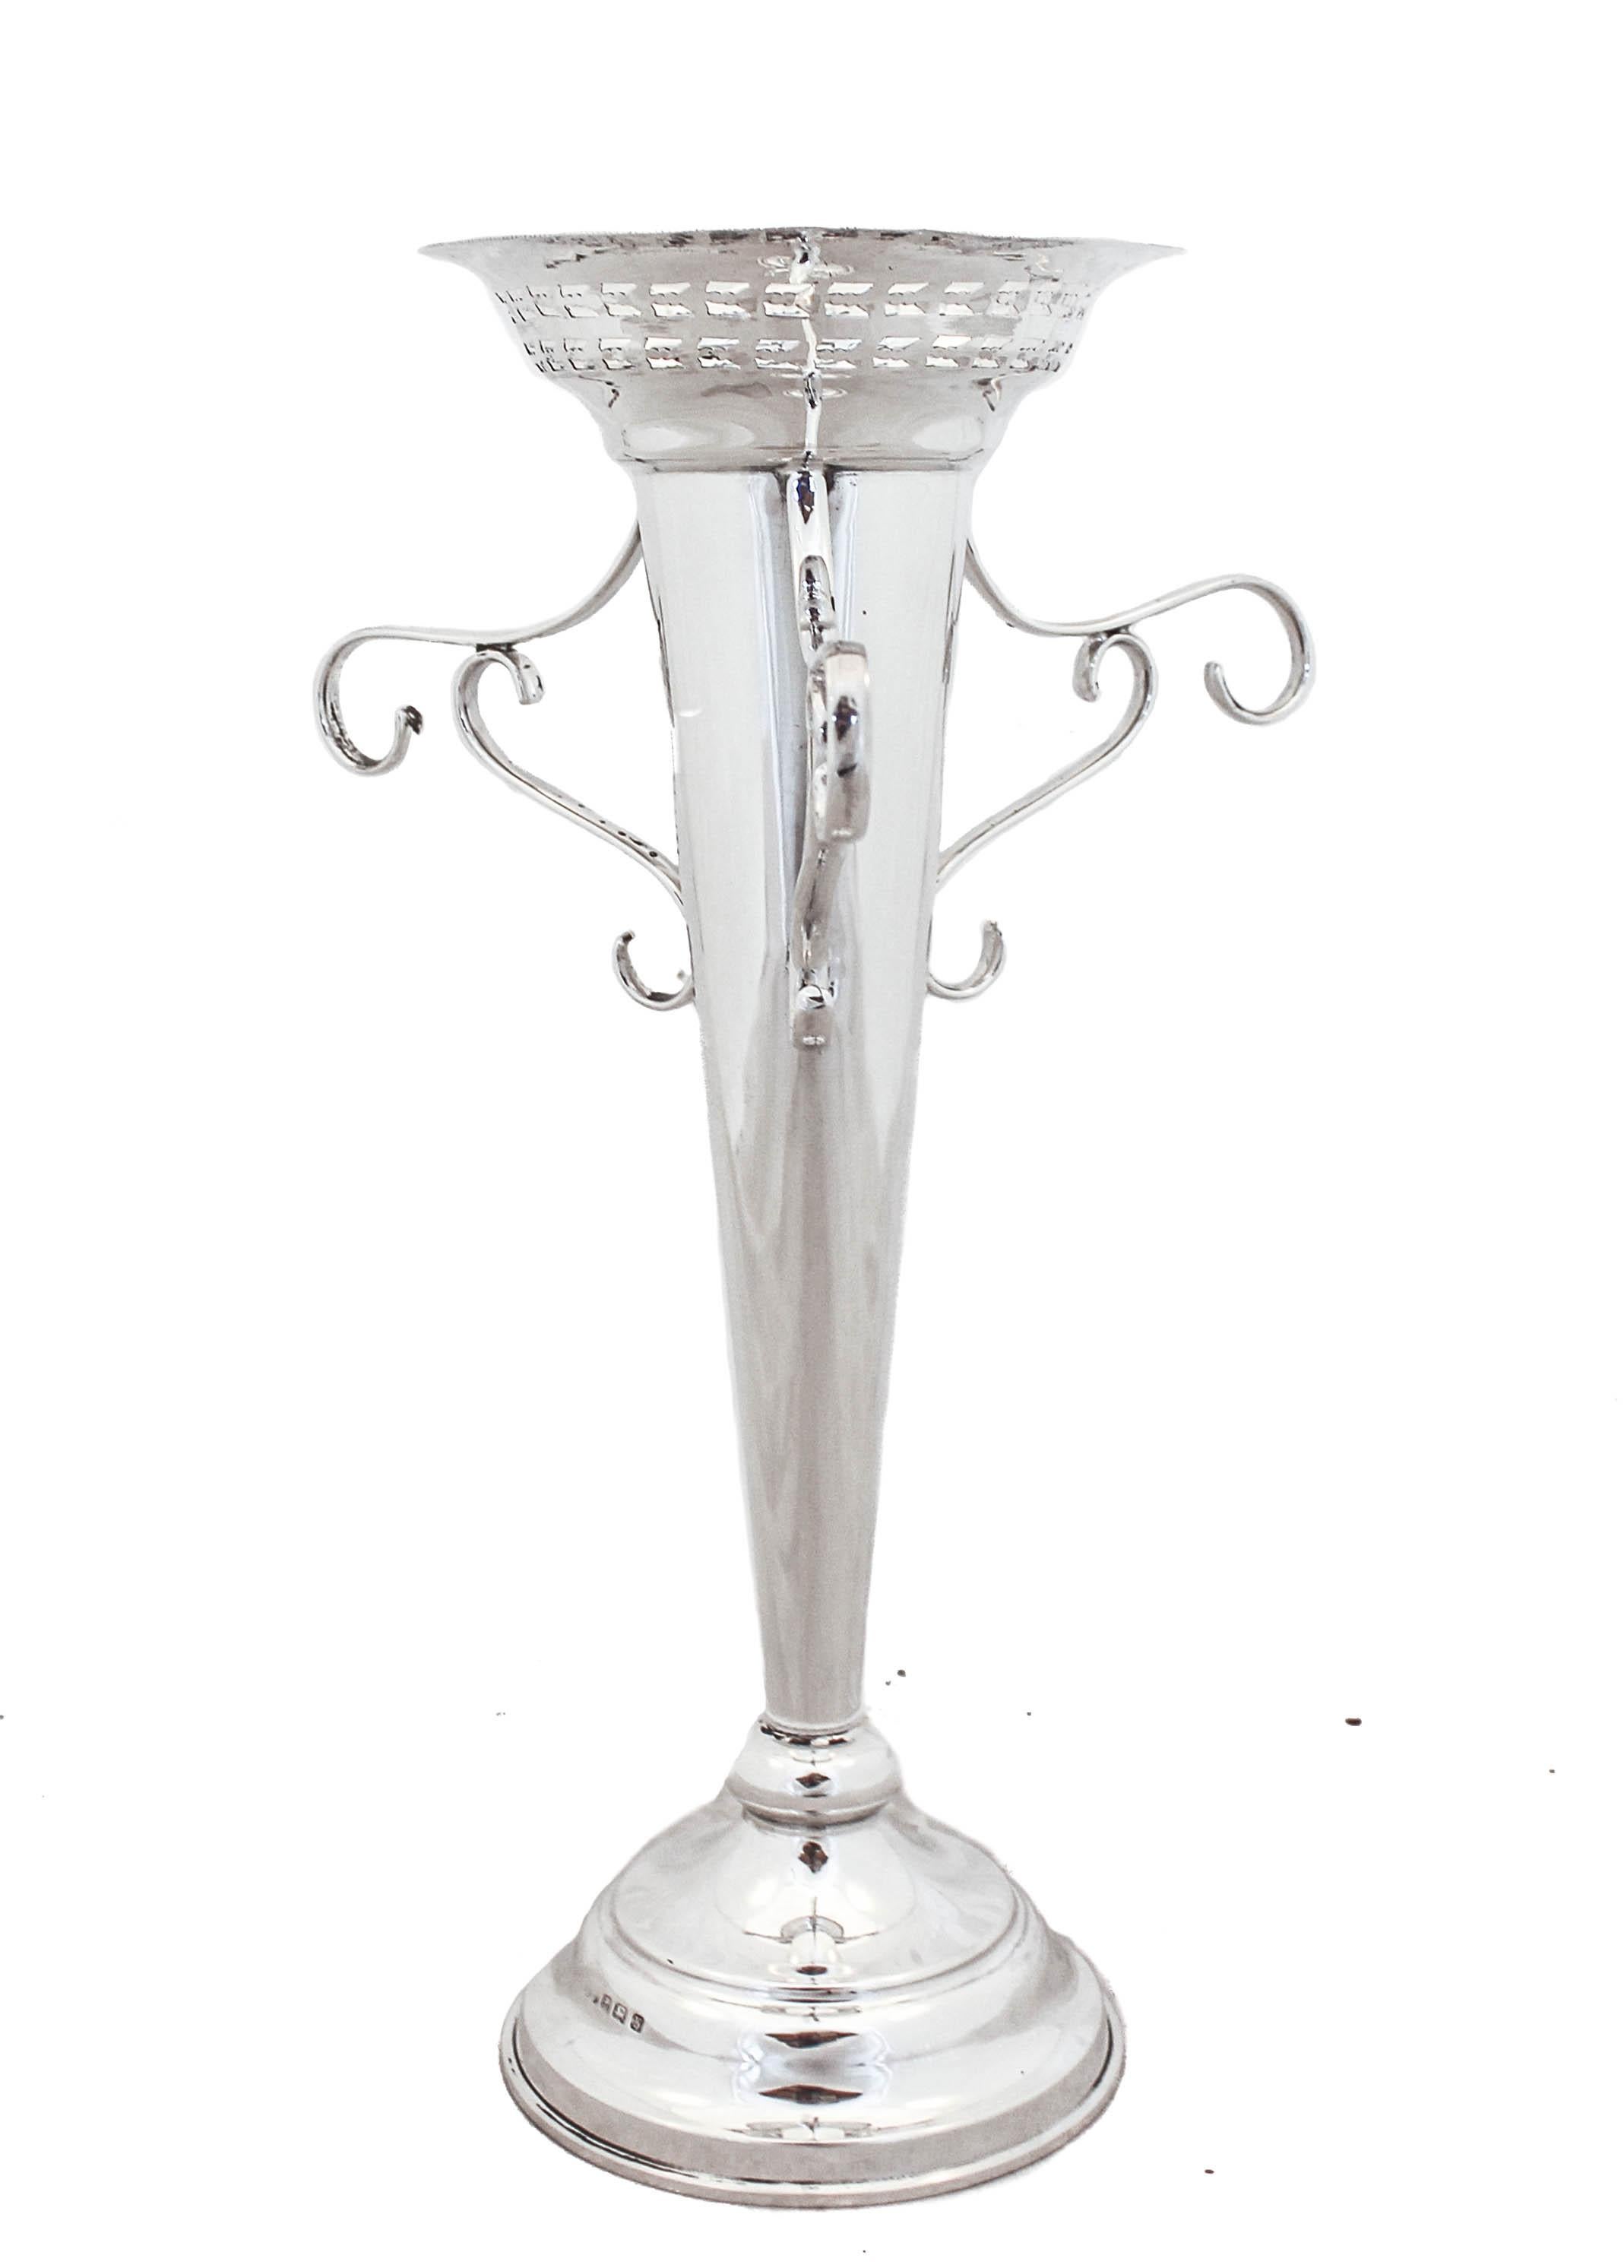 what is an epergne used for